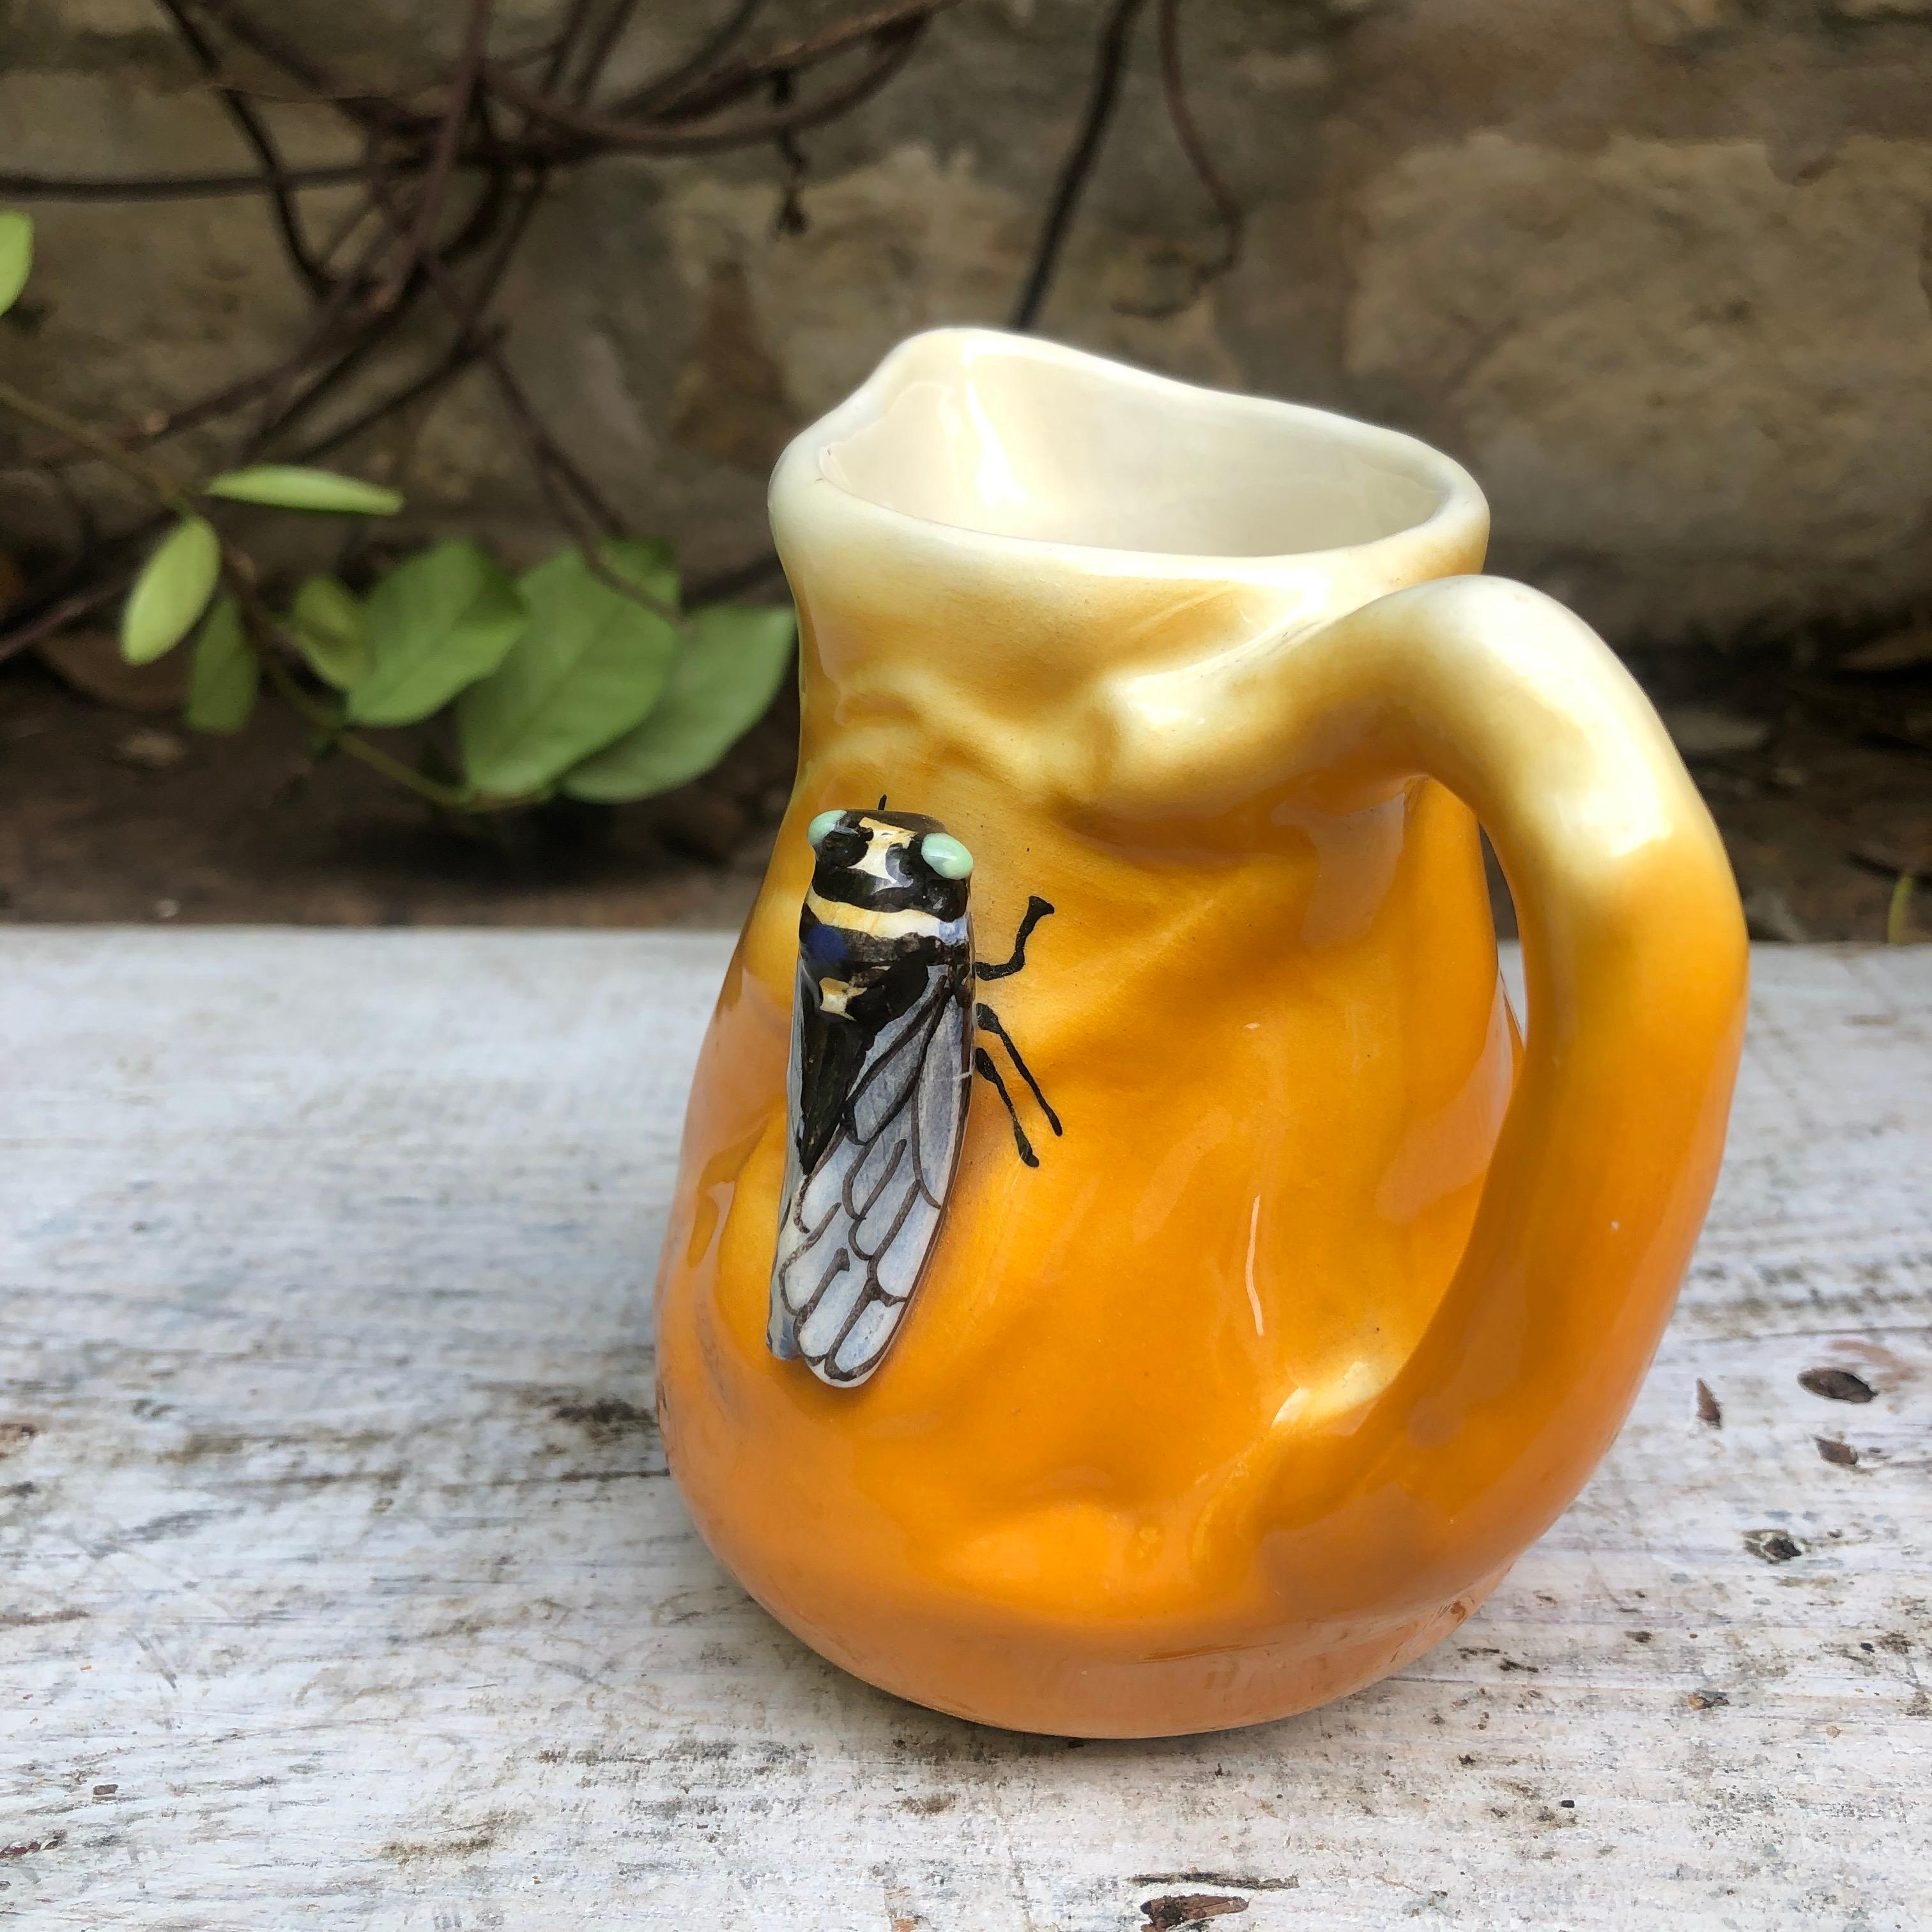 Mid-Century Modern Majolica Pitcher with Cicada and Olives Sicard, circa 1950